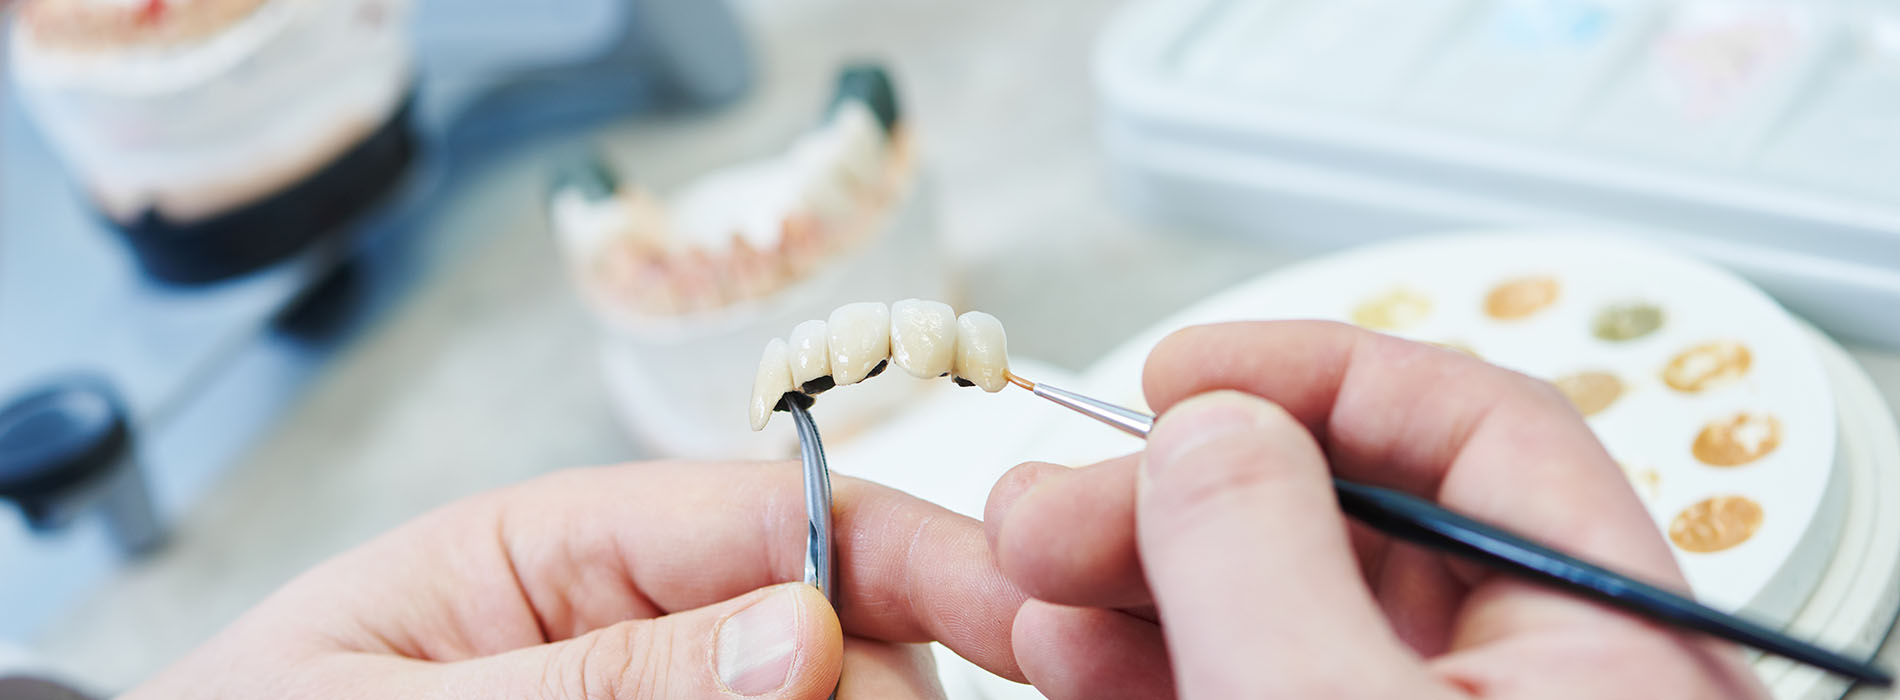 North Texas Dental Care | E4D, Teeth Whitening and Root Canals